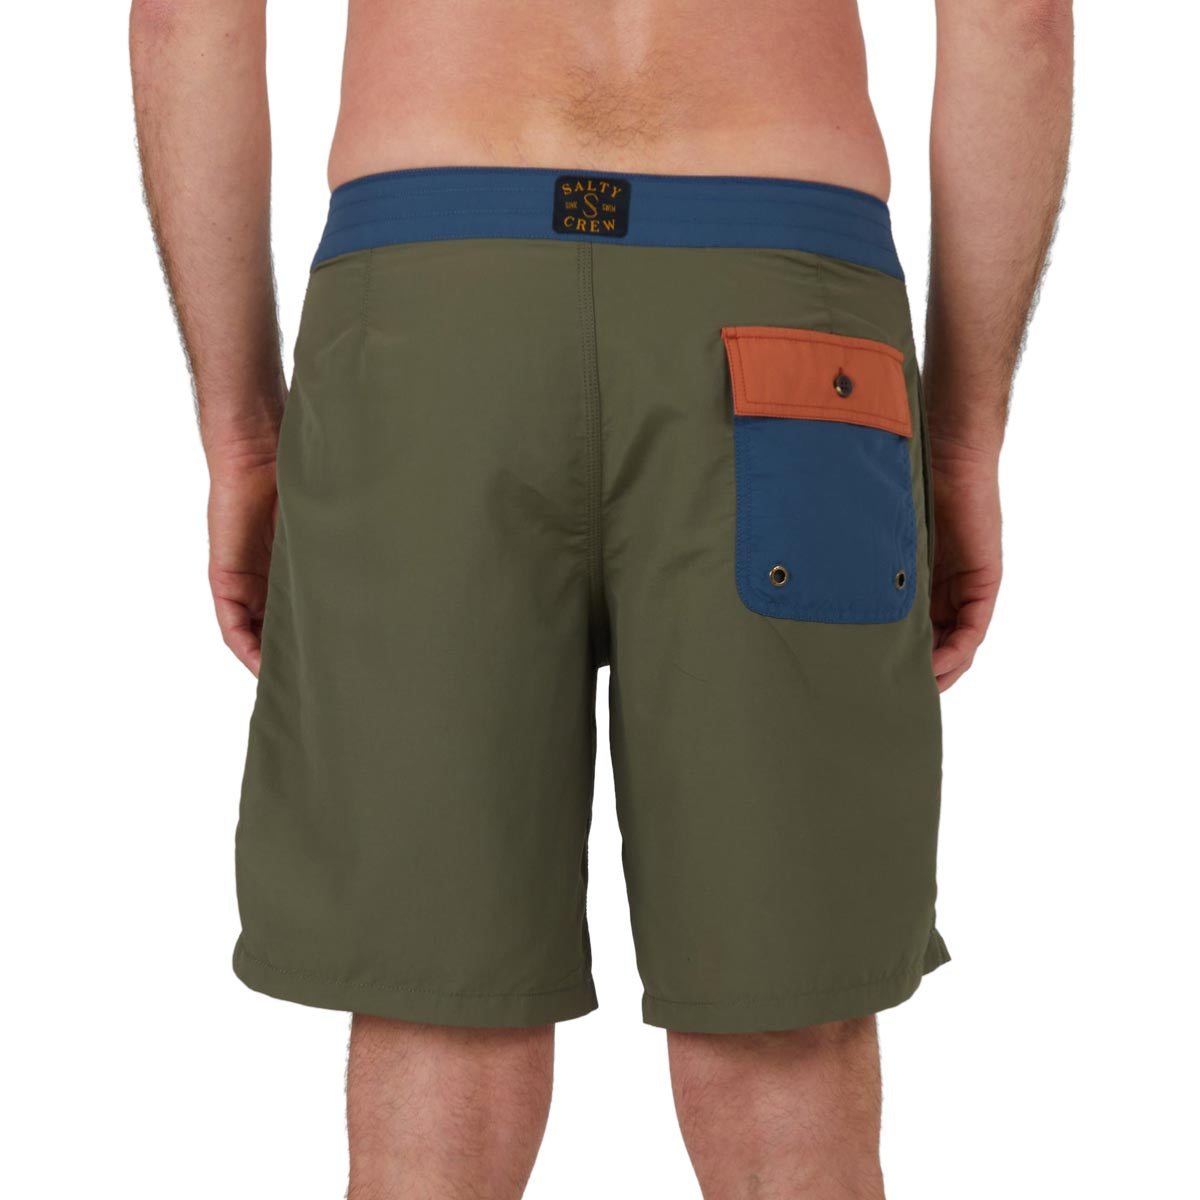 Salty Crew Clubhouse Board Shorts - Olive image 3